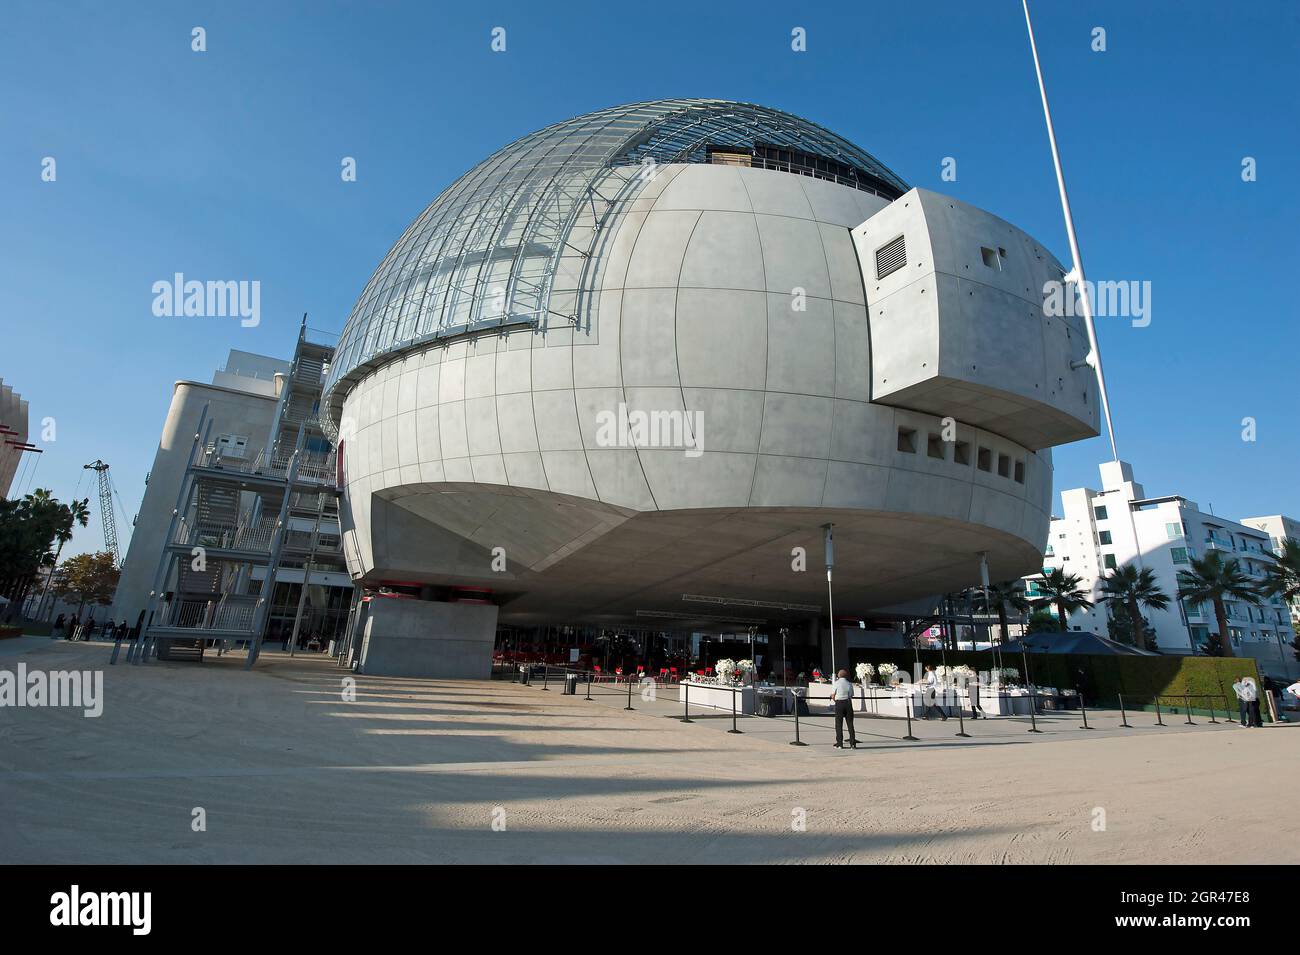 Renzo Piano's Sphere Building im Academy Museum of Motion Picturs, Los Angeles, Kalifornien, USA Stockfoto